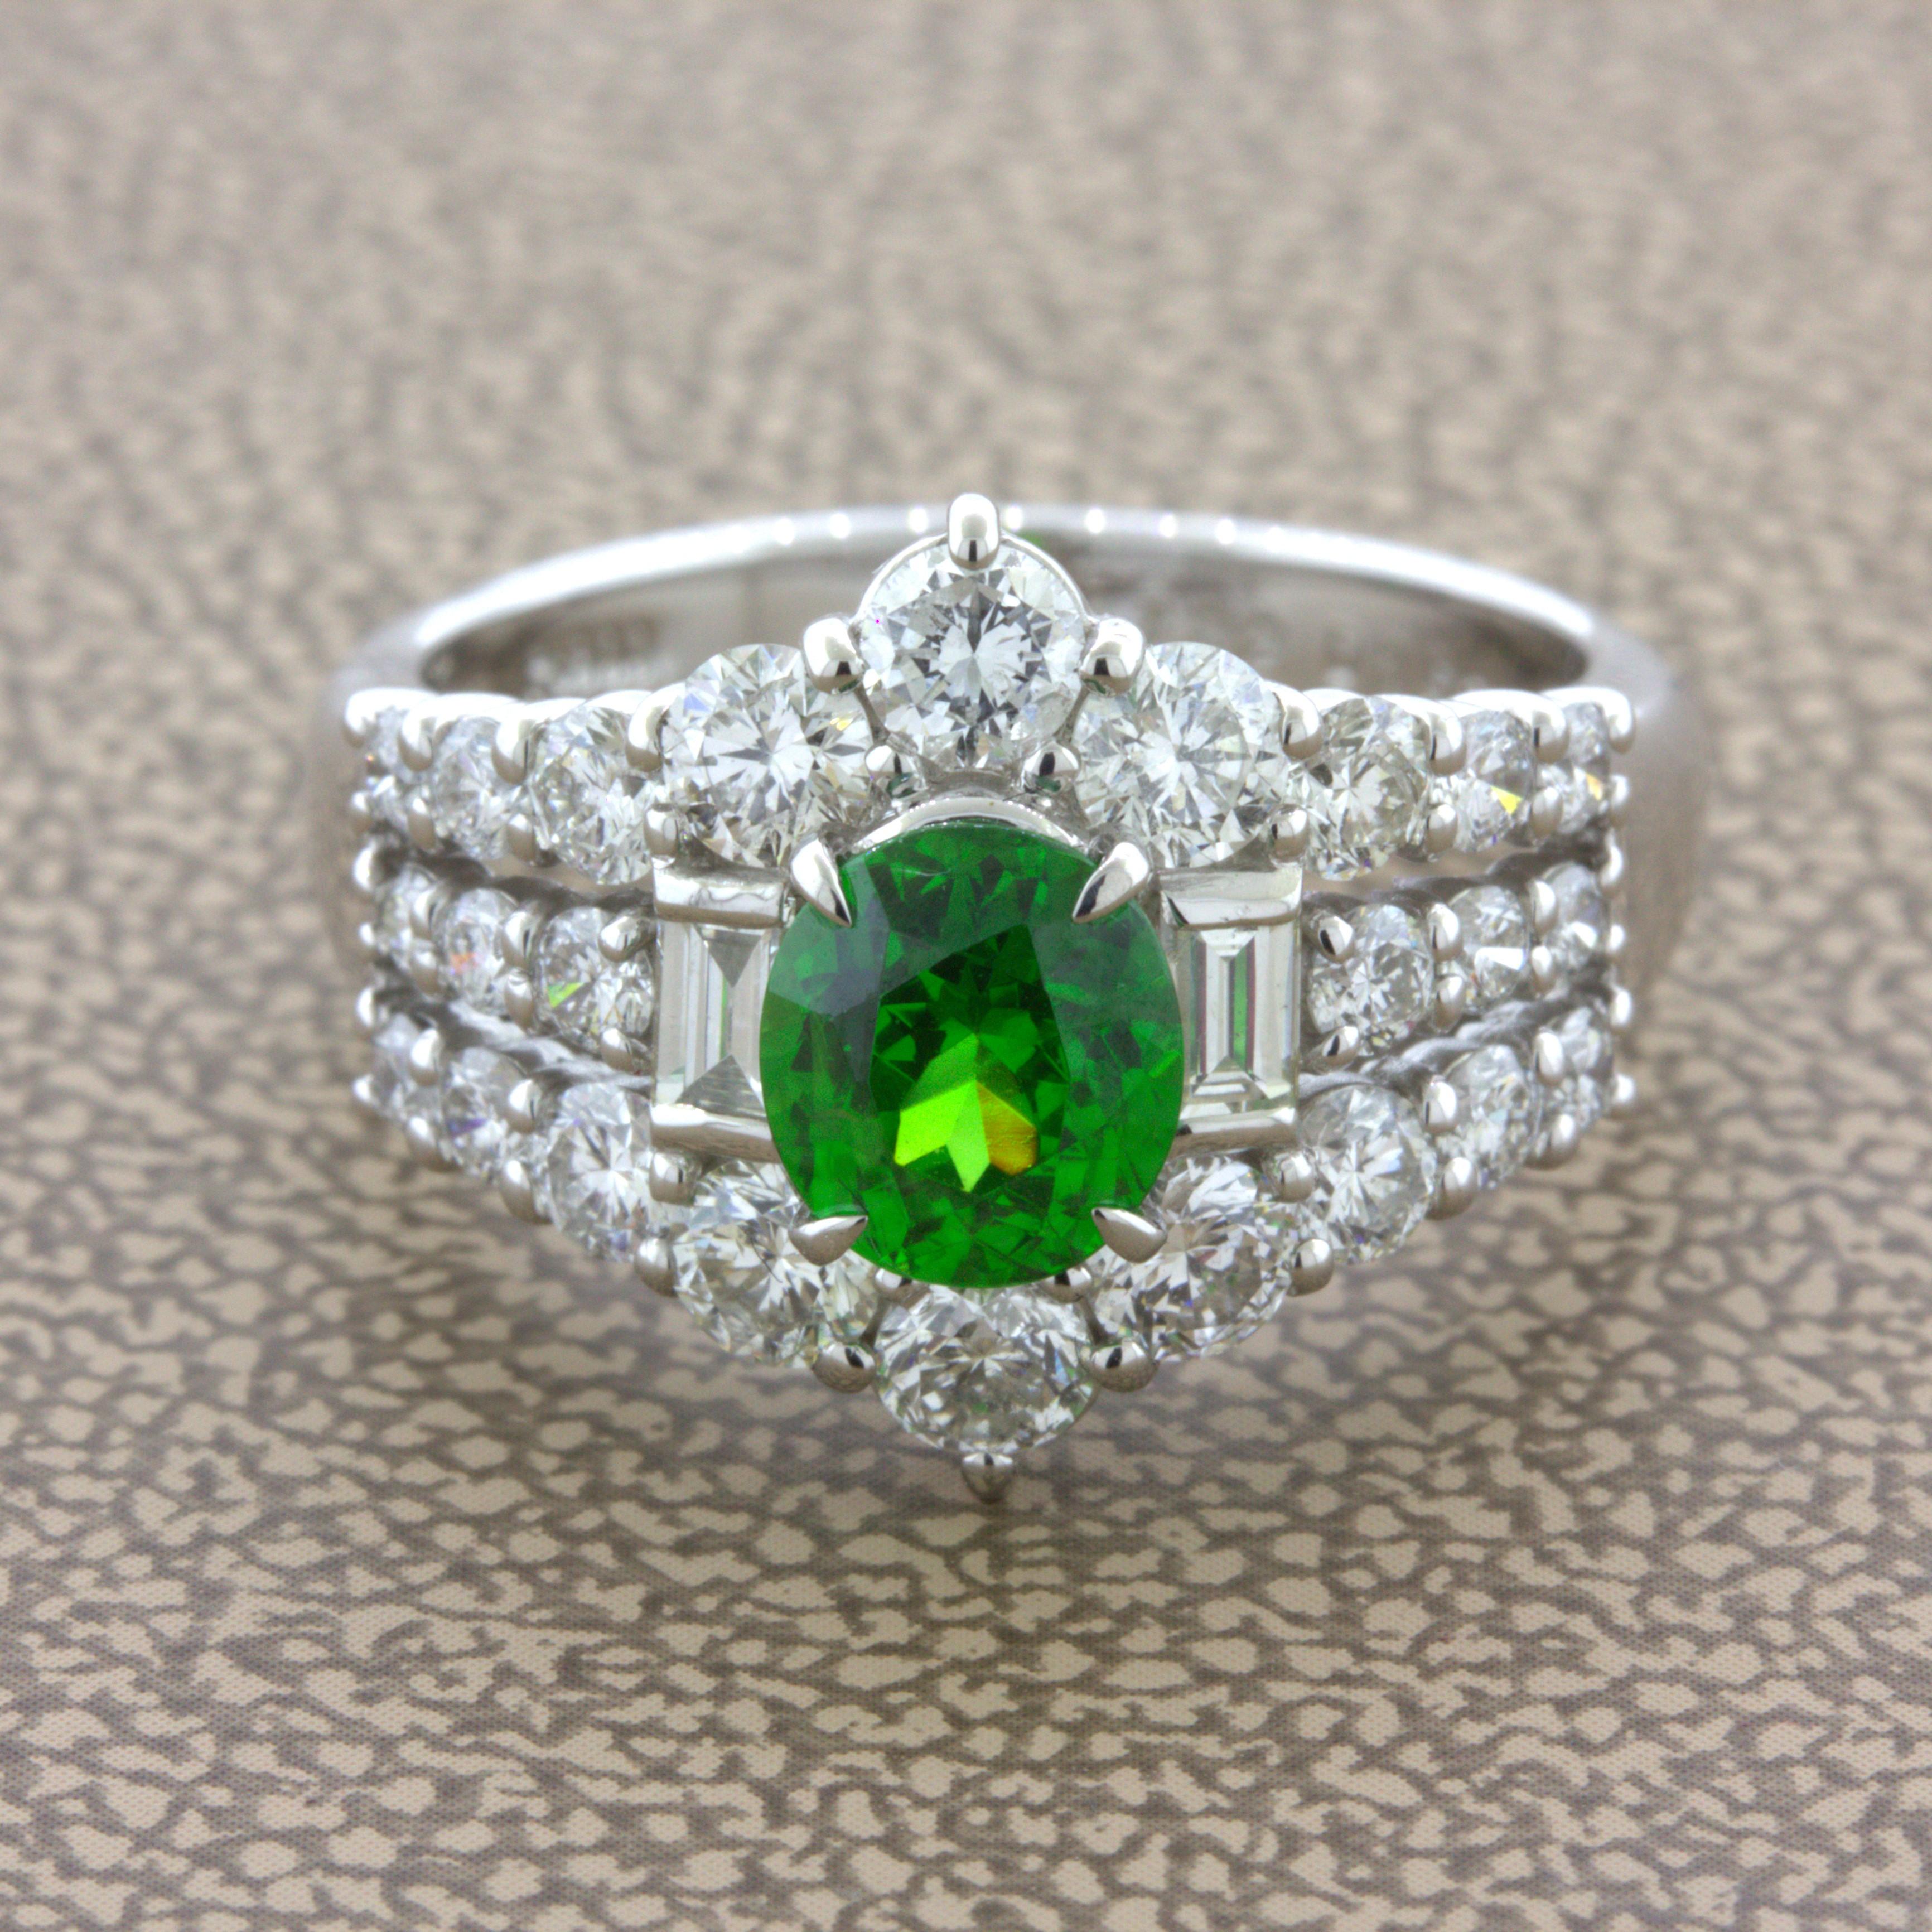 A beautiful and very rare fine gemstone! It is a demantoid garnet from the Ural Mountains in Russia. They are prized for their intense green color that rivals emerald and its high levels of fire which surpass diamond. This example is a 1.22 carat